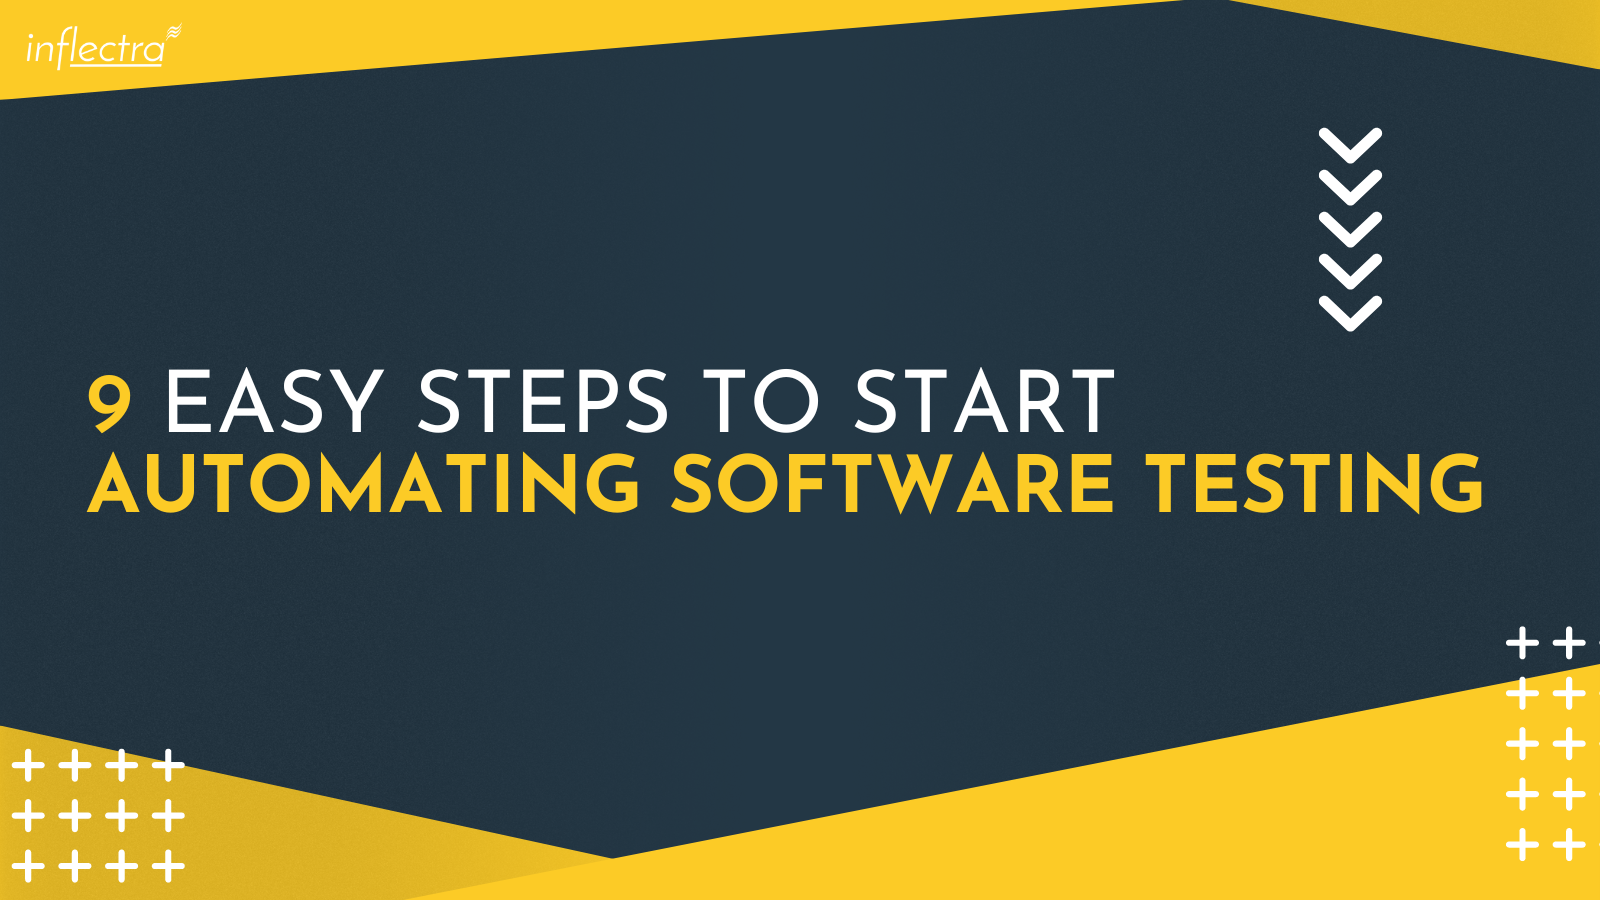 nine-easy-steps-to-start-automating-software-testing-image